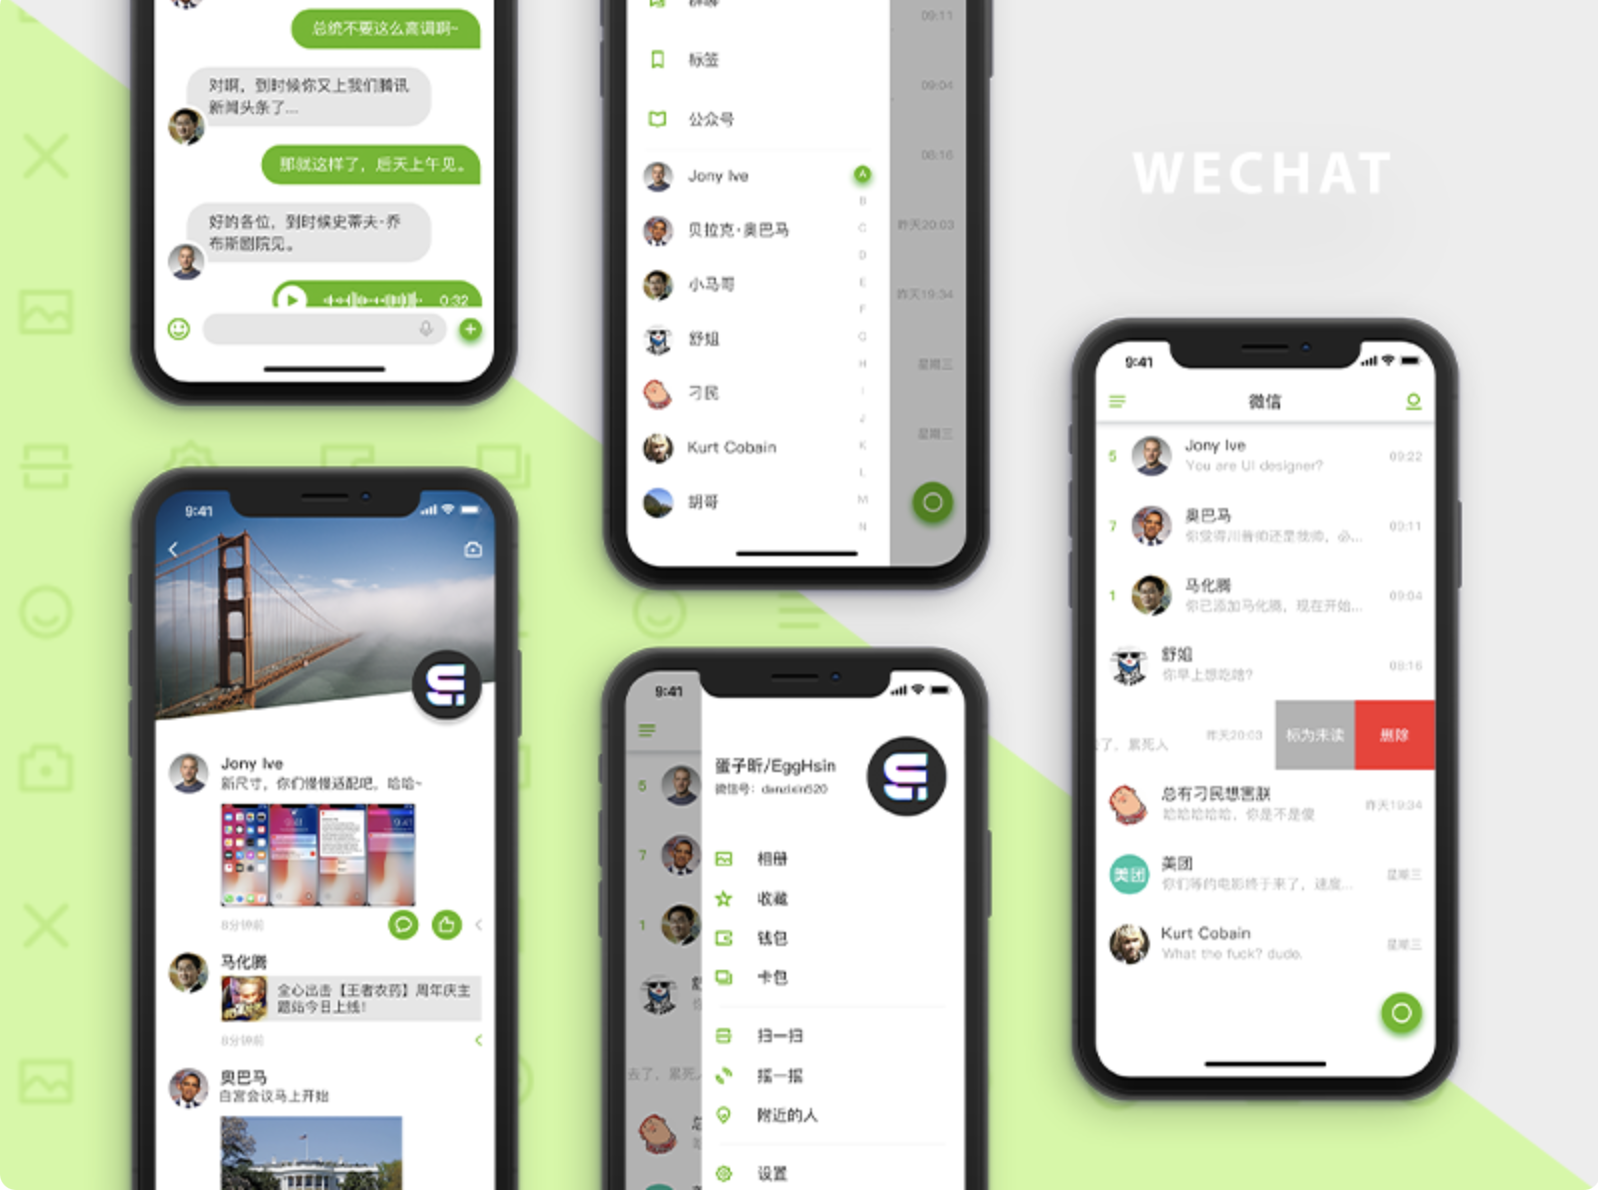 Are there ways to quickly hack accounts in WeChat